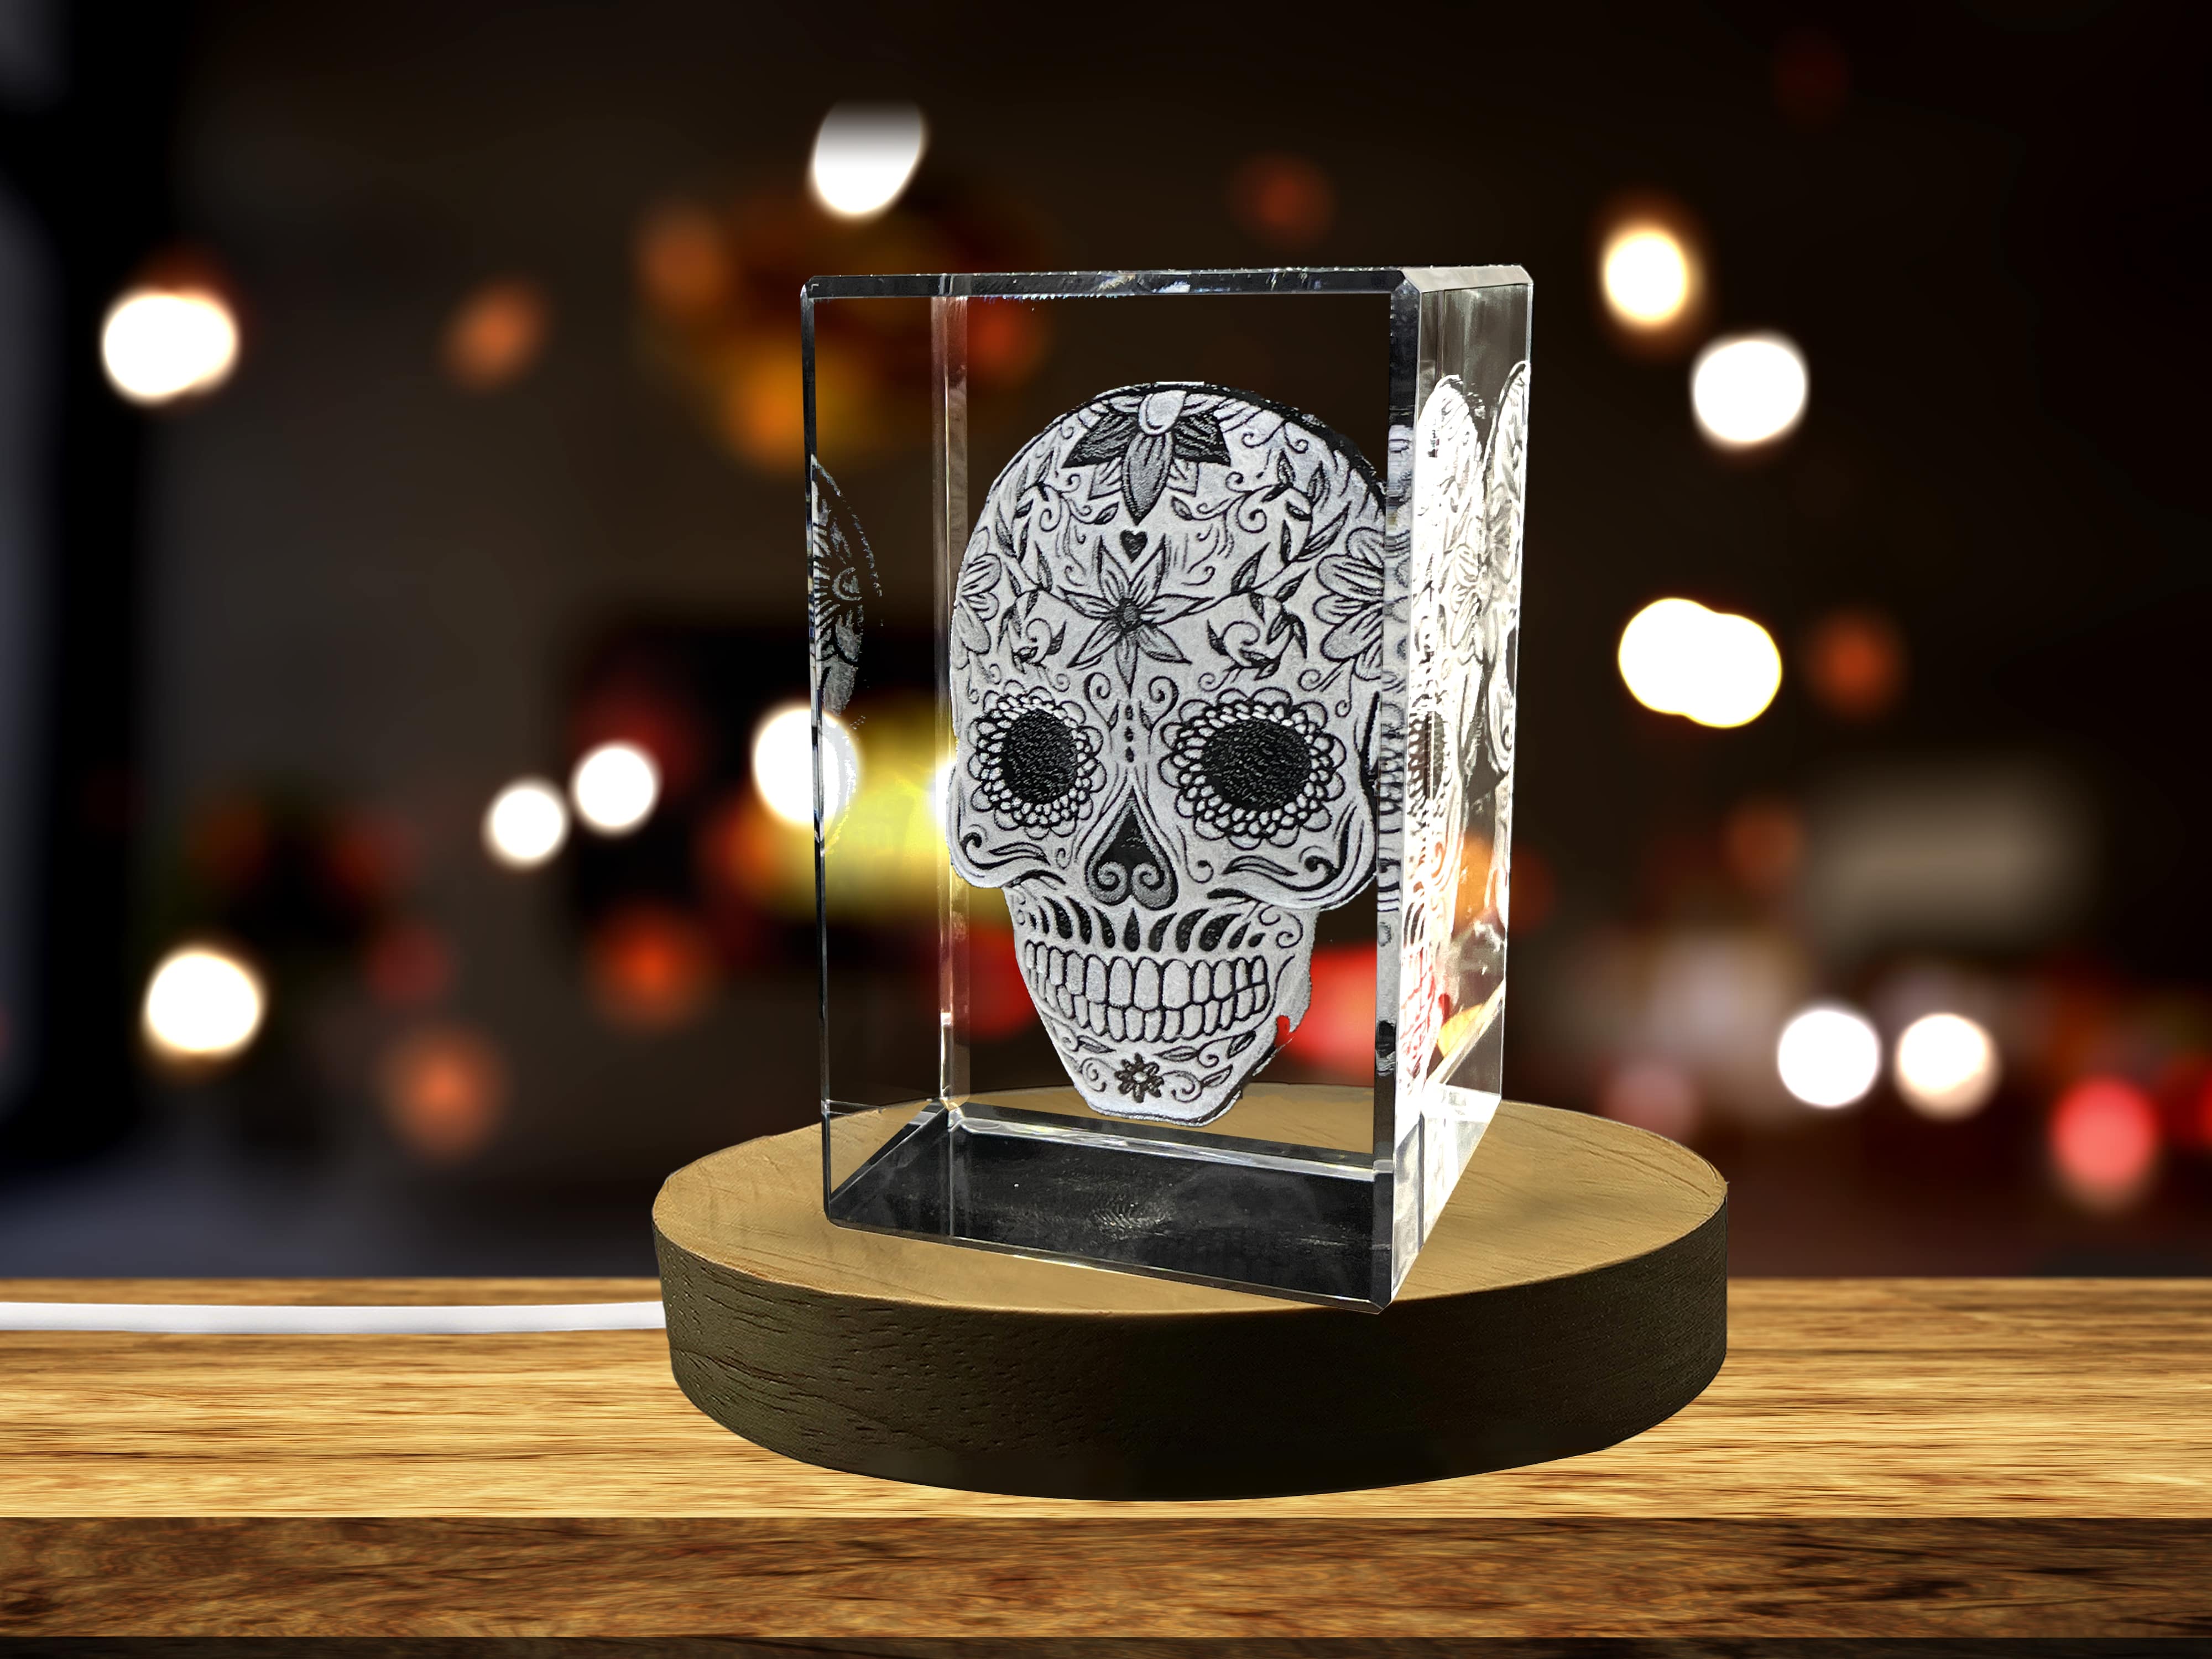 Mexican Skull 3D Engraved Crystal Decor with LED Base - Handcrafted Premium Quality Glass A&B Crystal Collection